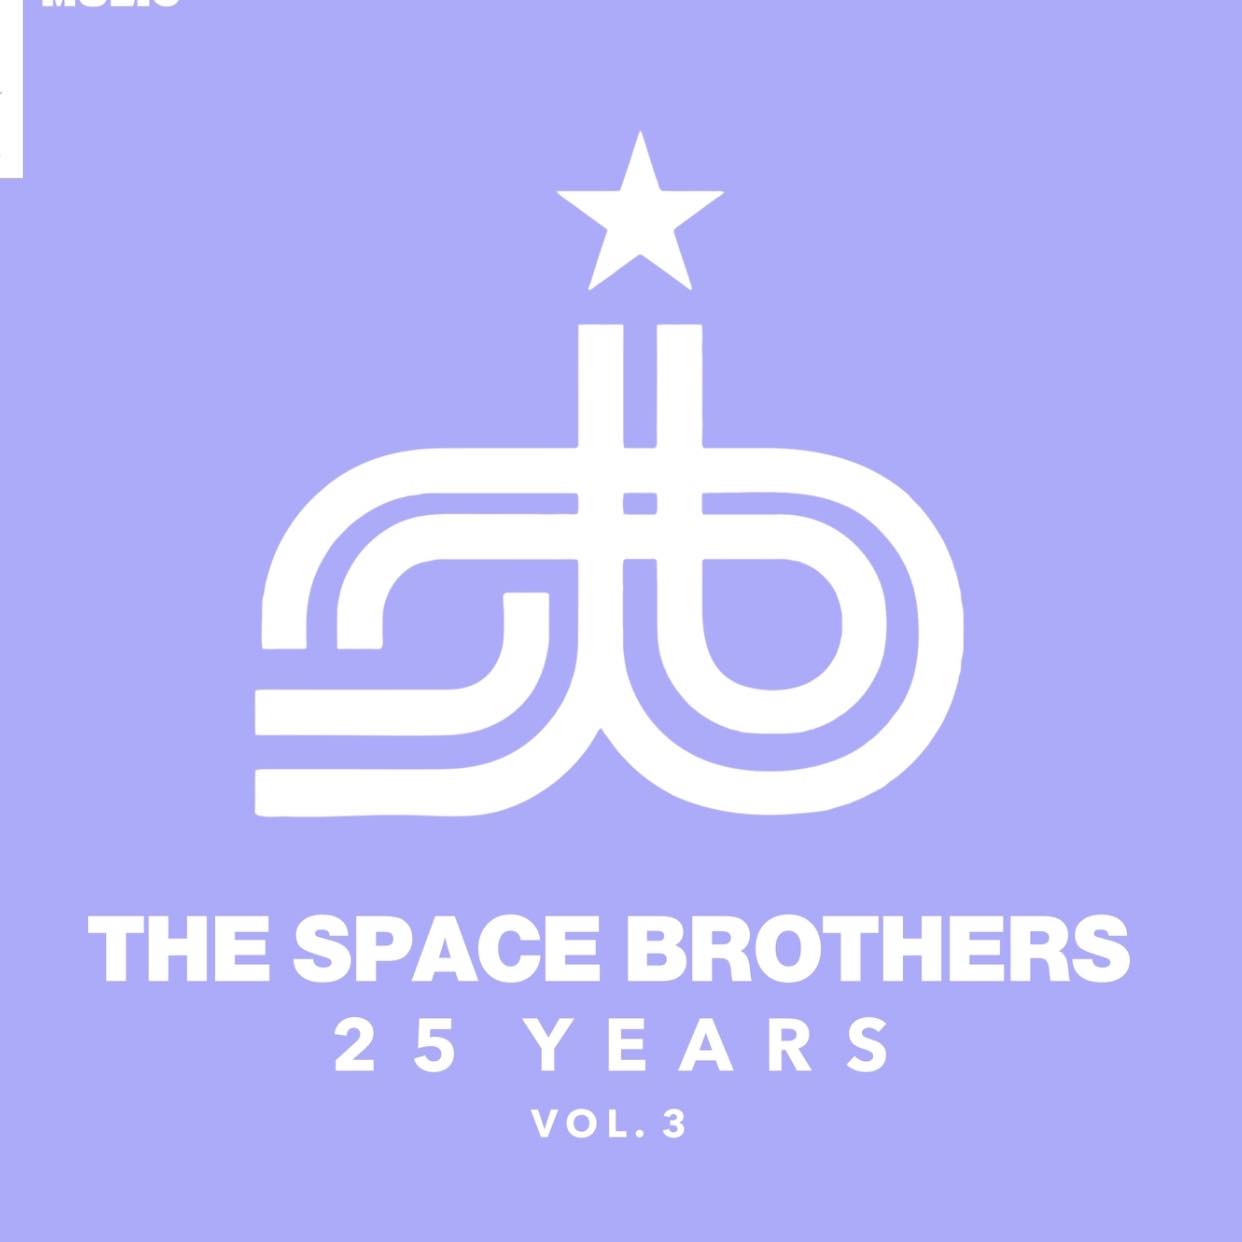 The Space Brothers presents 25 Years volume 3 on Armada Music